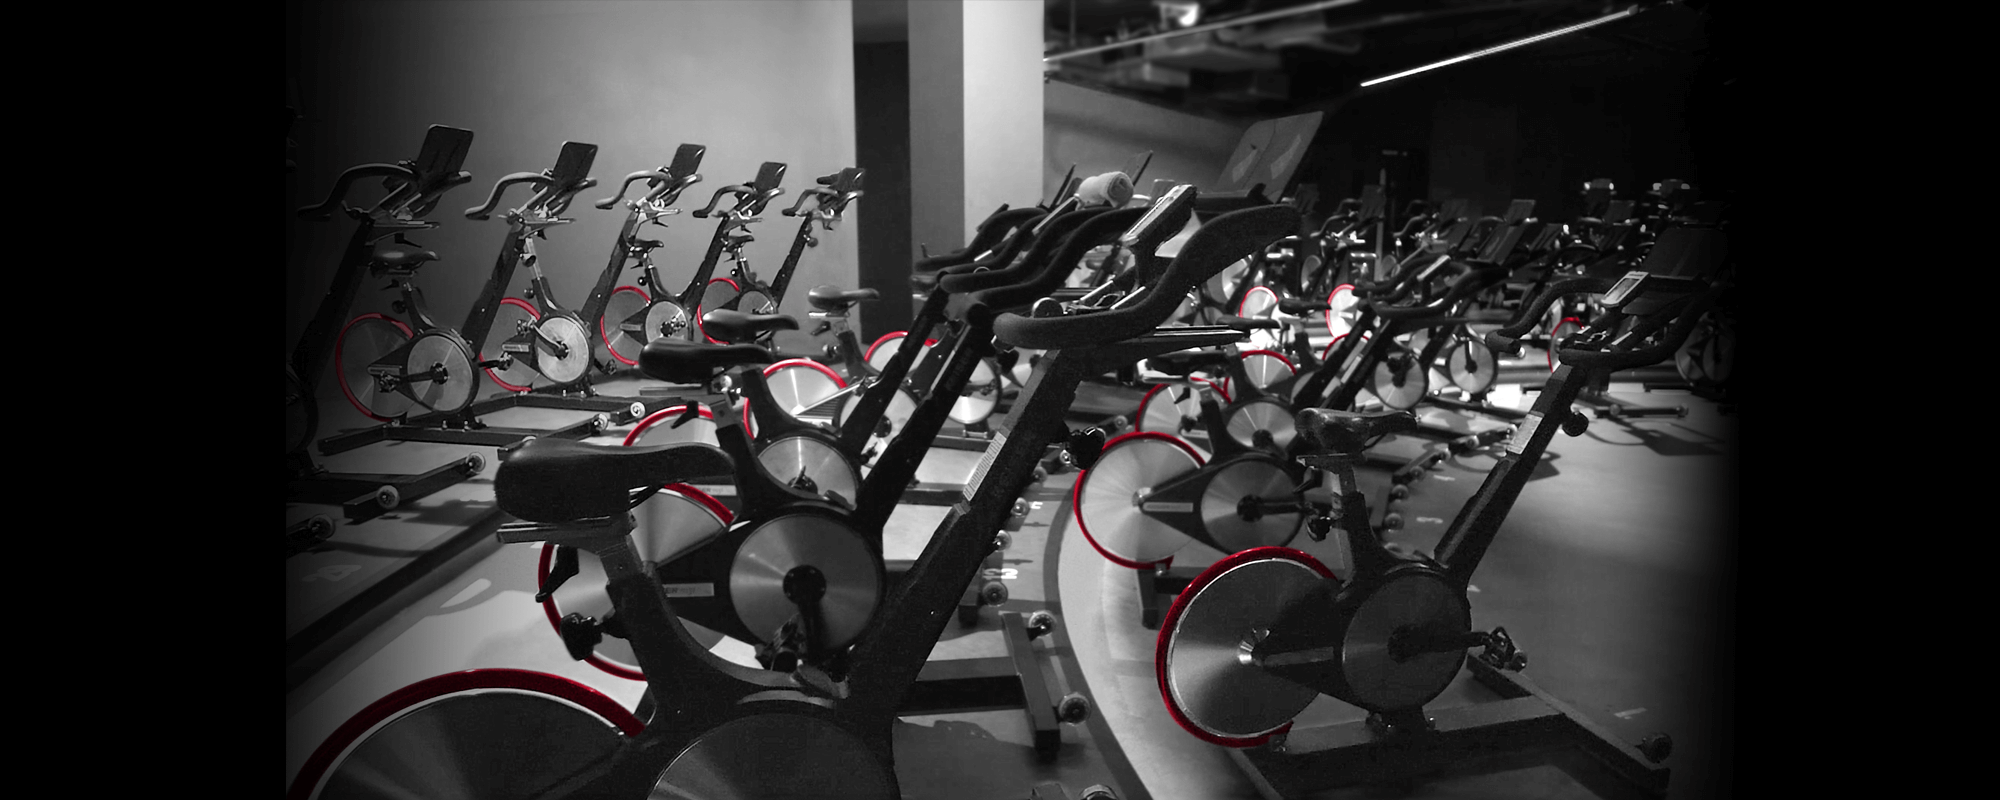 Choosing the Right Indoor Group Cycling Bikes for Your Studio or Gym